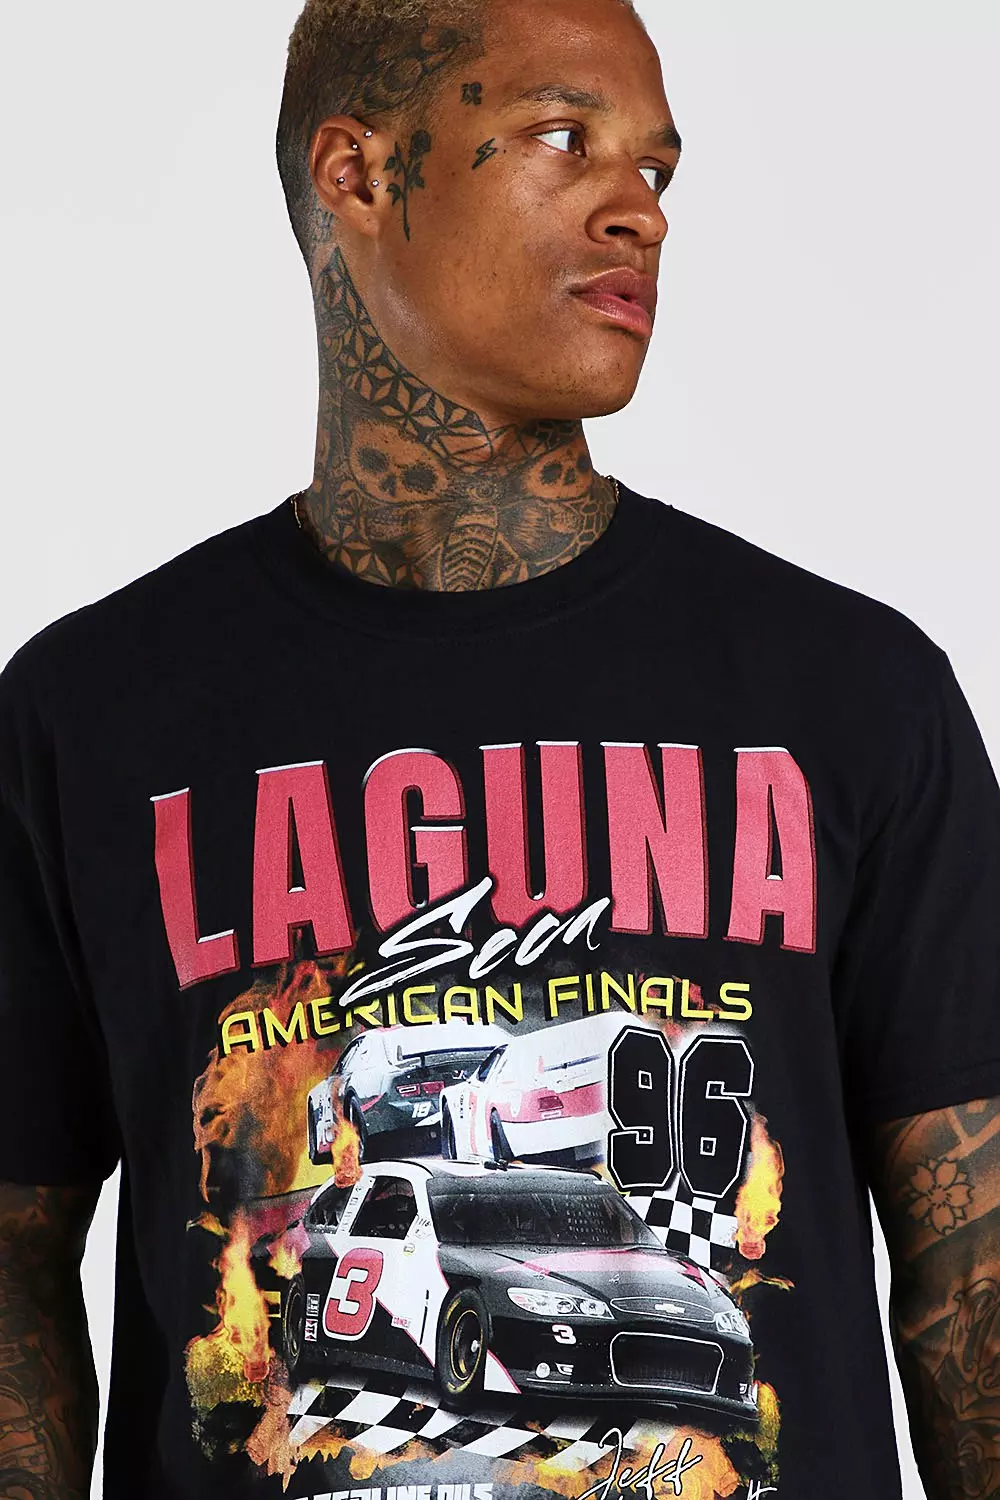 Oversized Car Graphic T-shirt